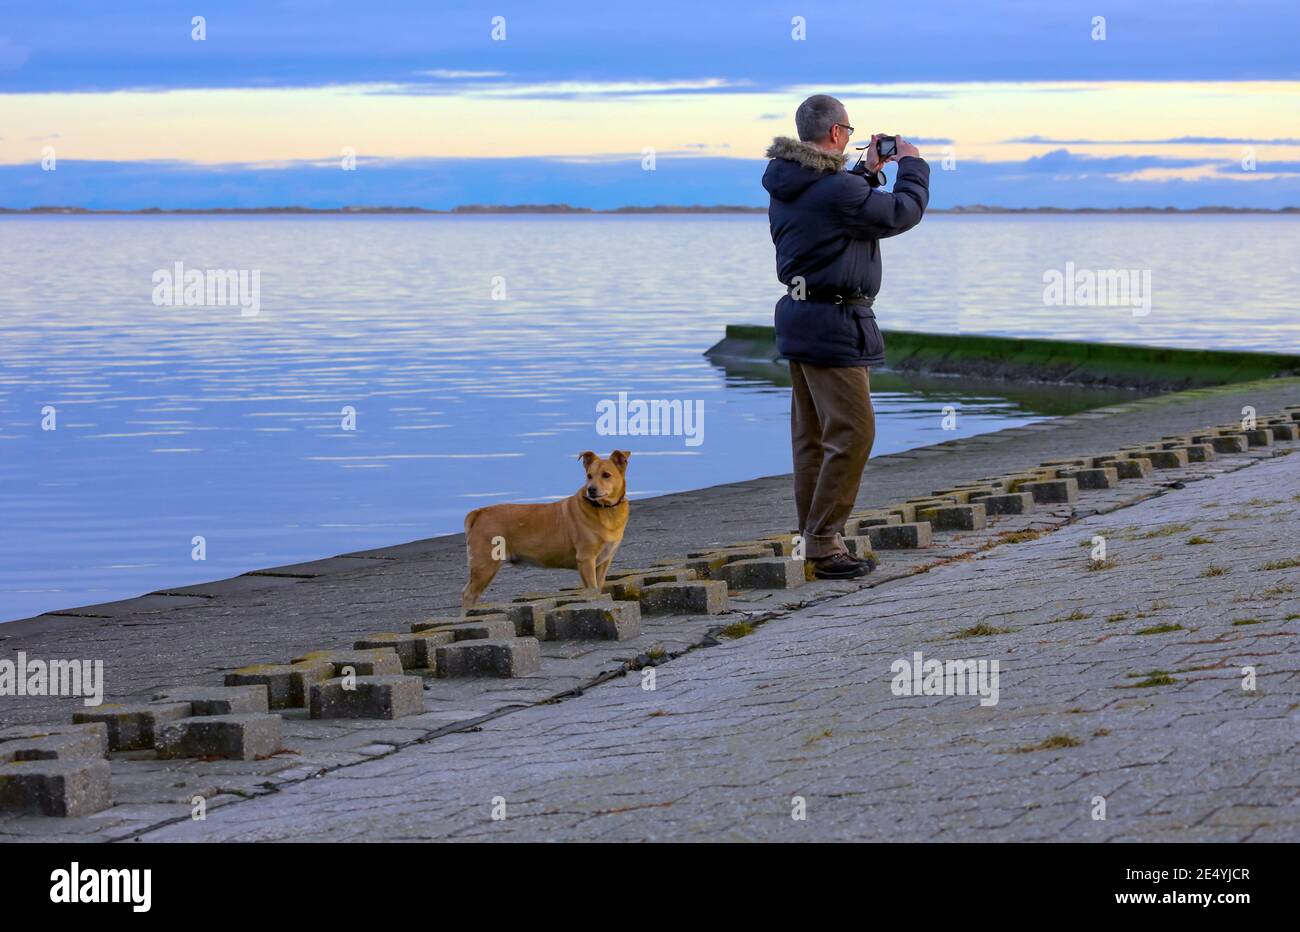 A man takes a photo by the North Sea. His dog is looking in a different direction. Everyone can enjoy the sea in their own way. Stock Photo